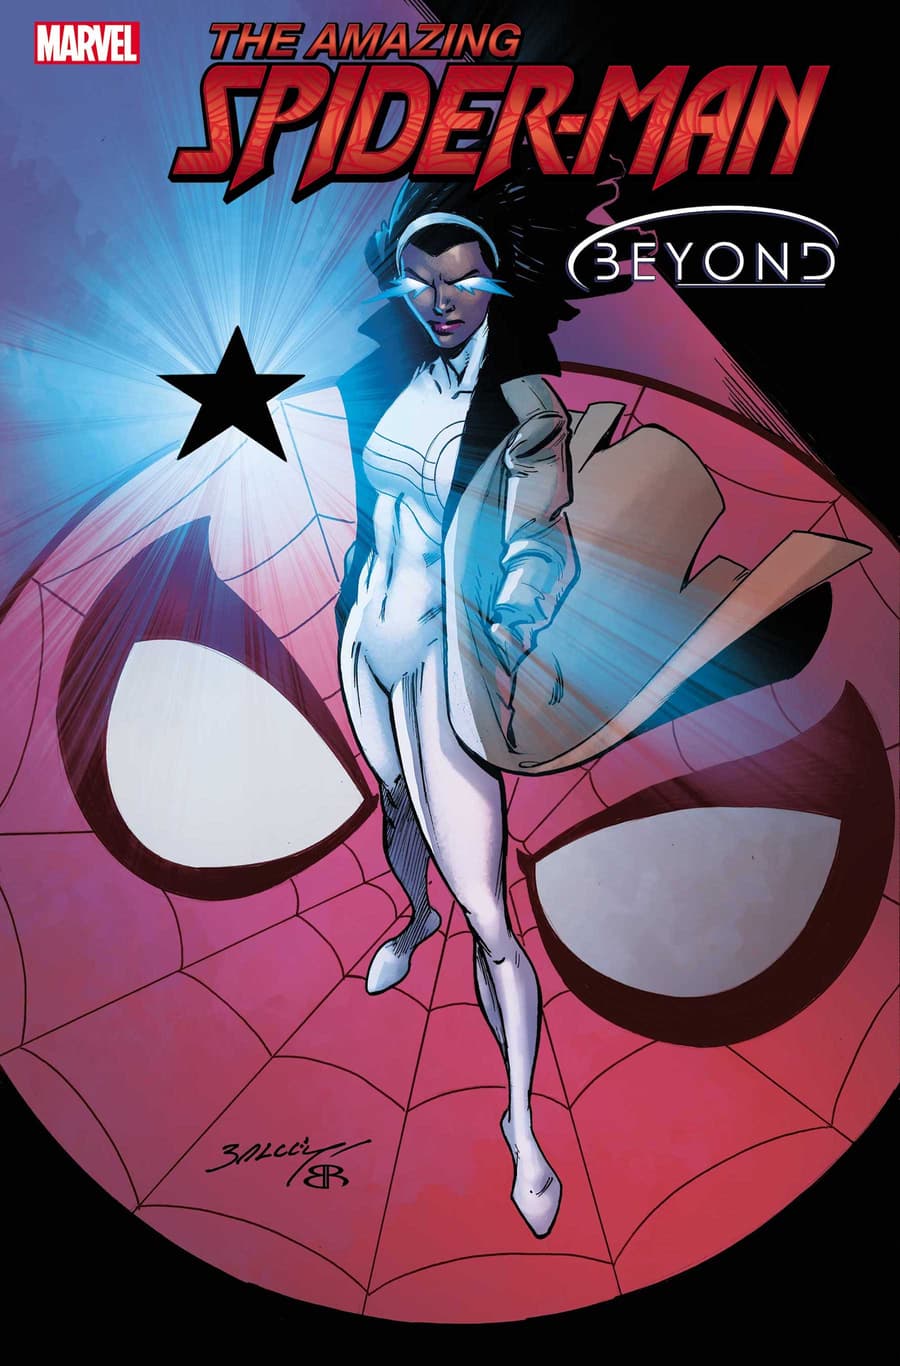 AMAZING SPIDER-MAN #92.BEY Cover by MARK BAGLEY